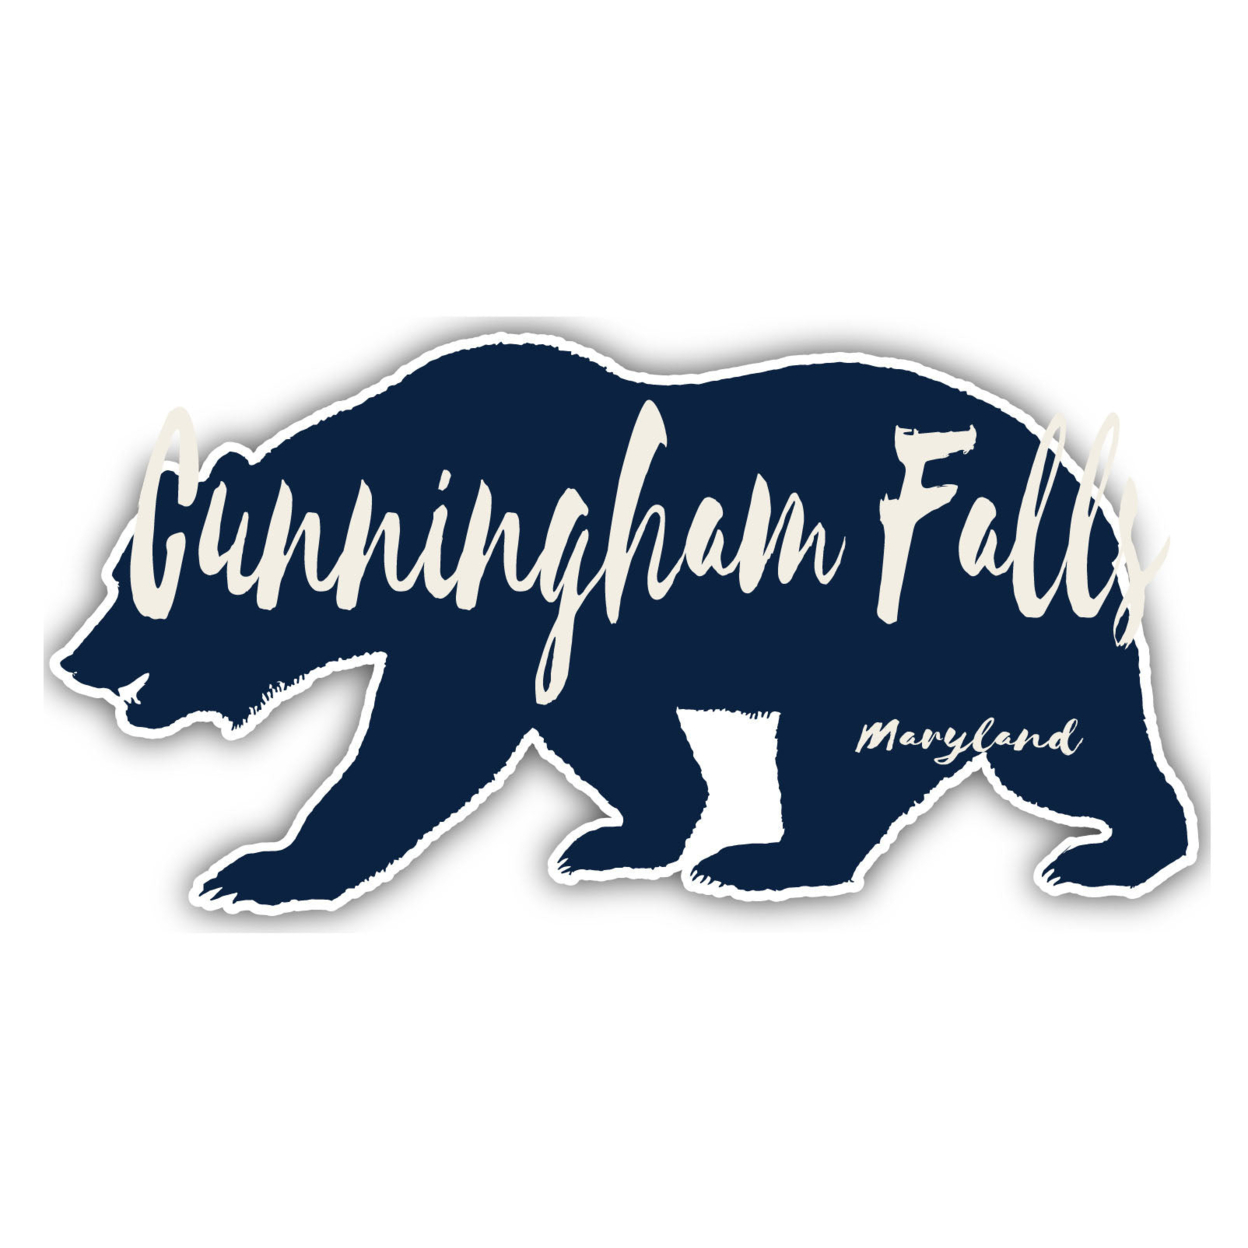 Cunningham Falls Maryland Souvenir Decorative Stickers (Choose Theme And Size) - 4-Pack, 4-Inch, Bear